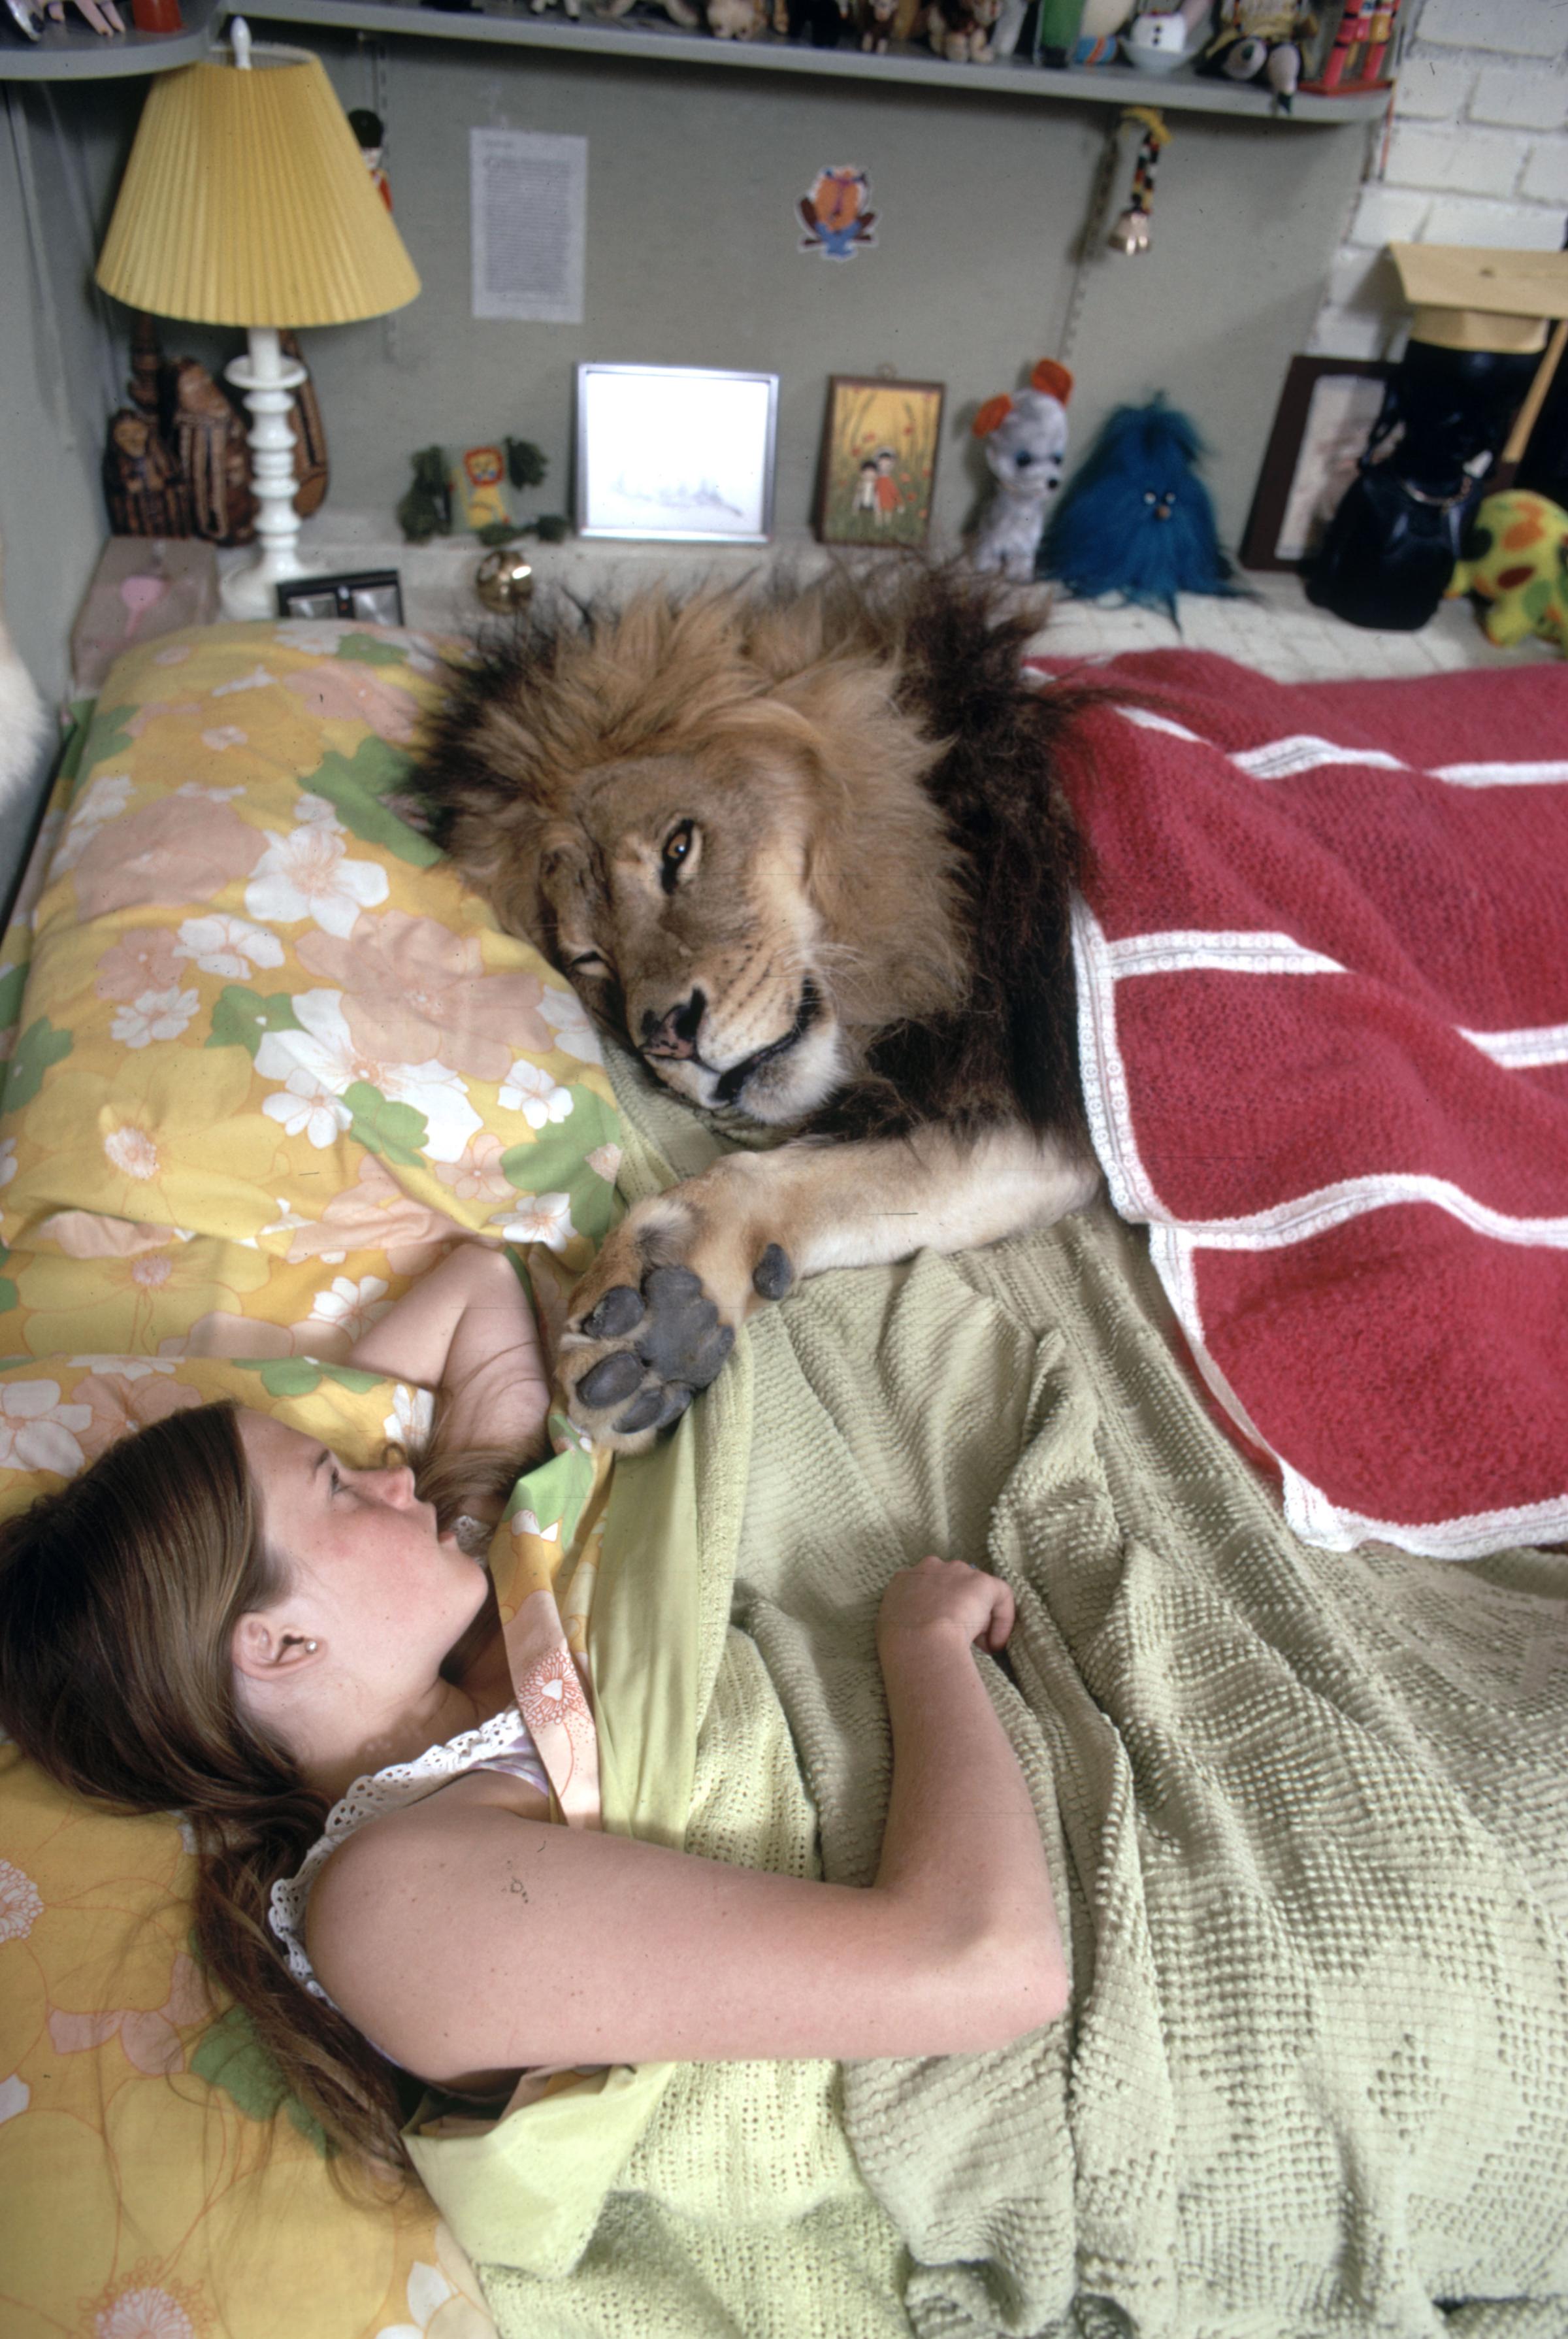 Melanie Griffith in bed with Neil the lion, 1971.